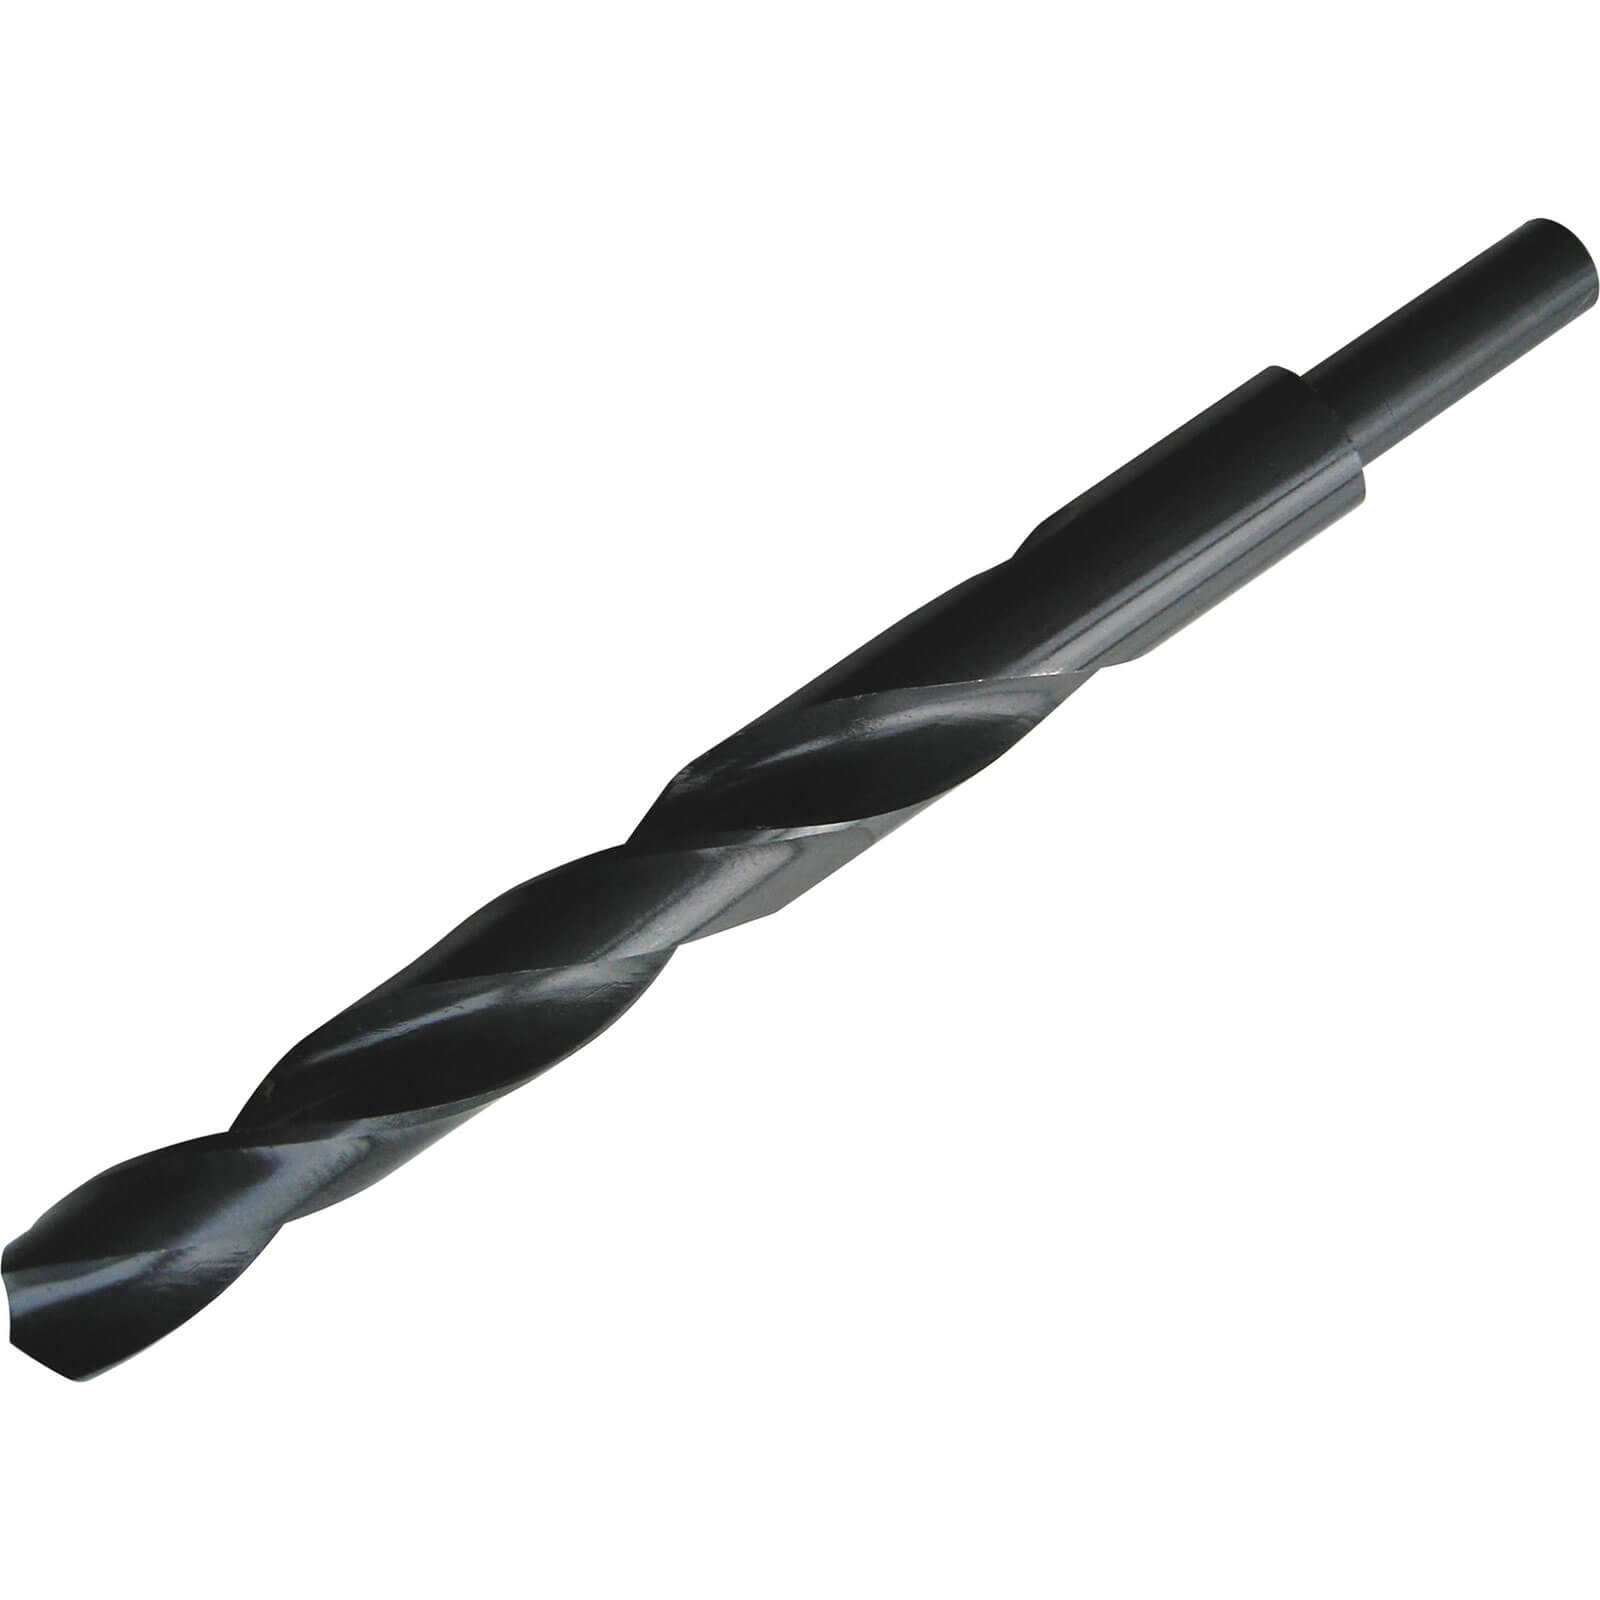 Photo of Irwin Hss Pro Drill Bits 16mm Pack Of 1